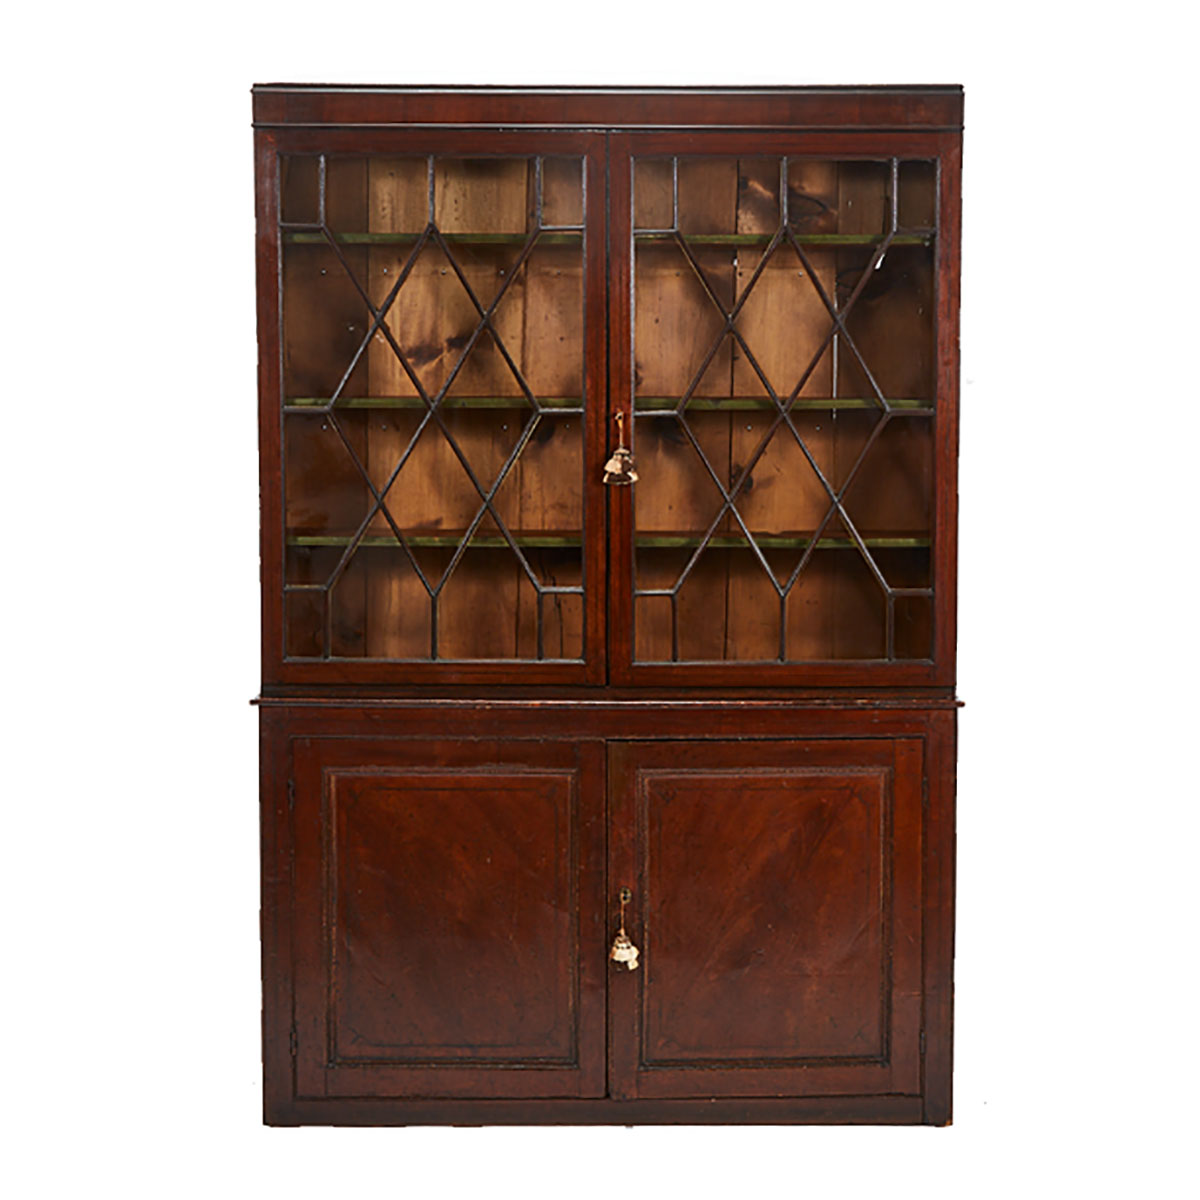 George III Mahogany Bookcase on Cabinet, late 18th century